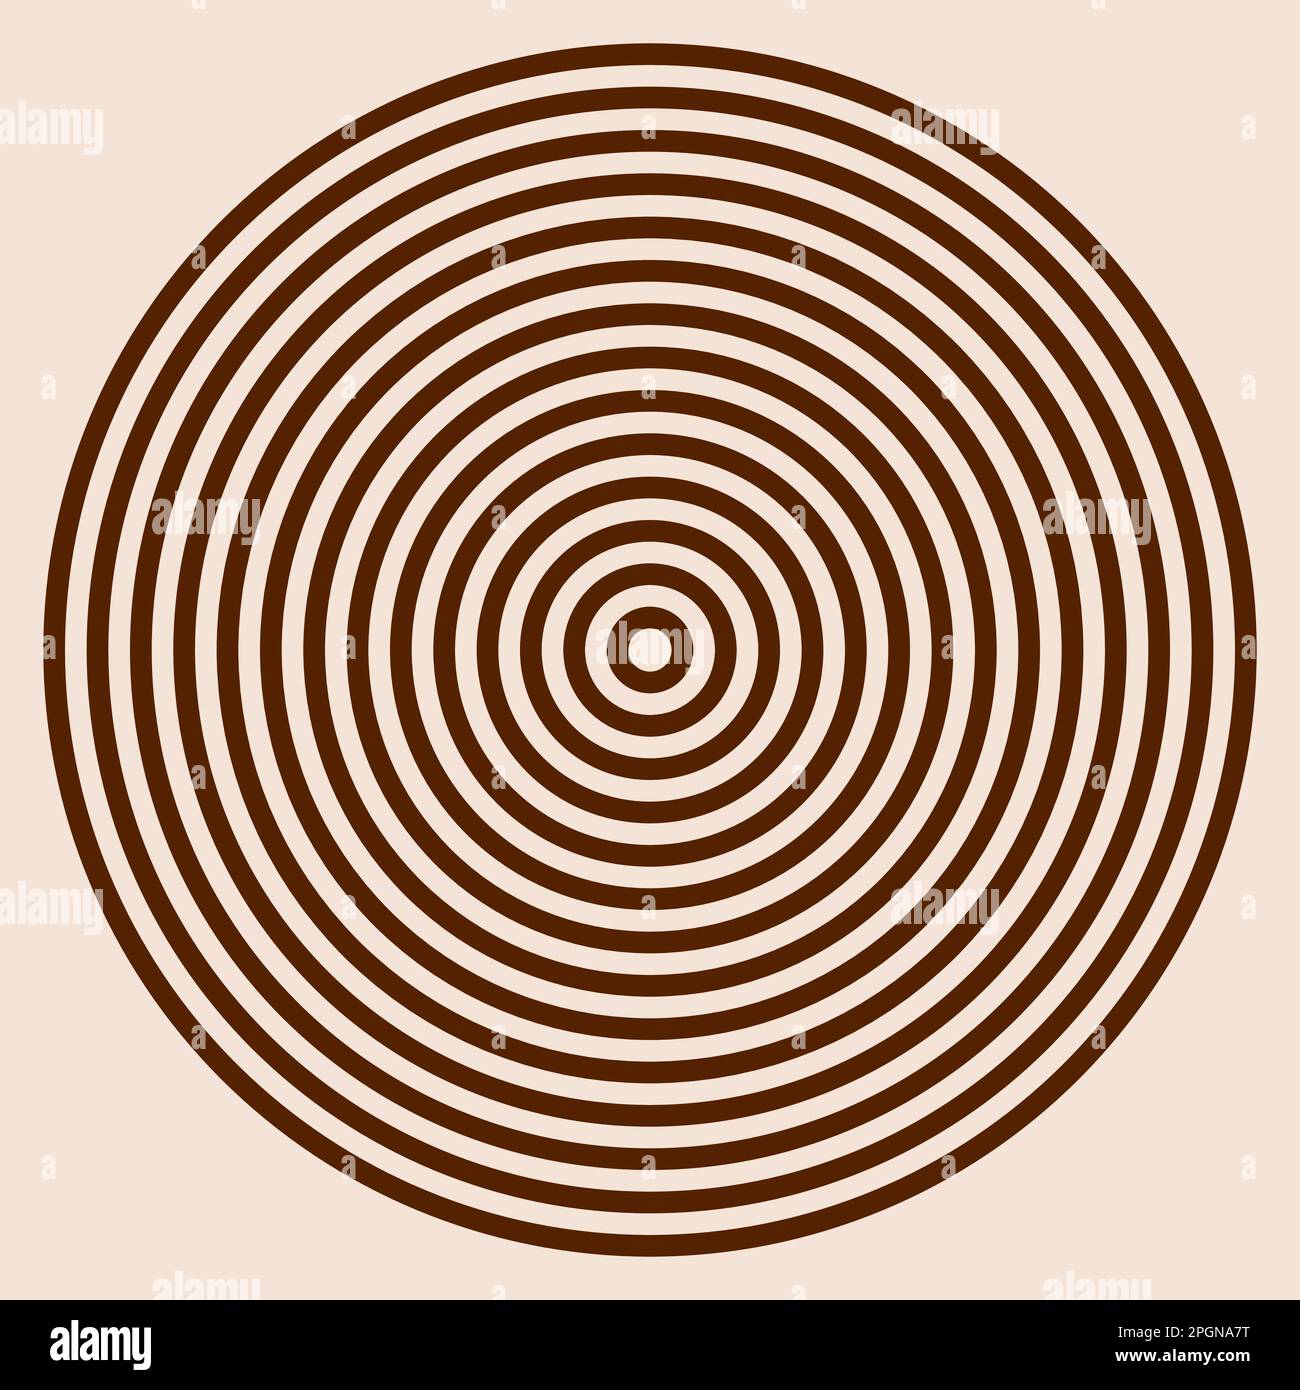 Brown and beige vector graphic of equi spaced concentric circles Stock Vector